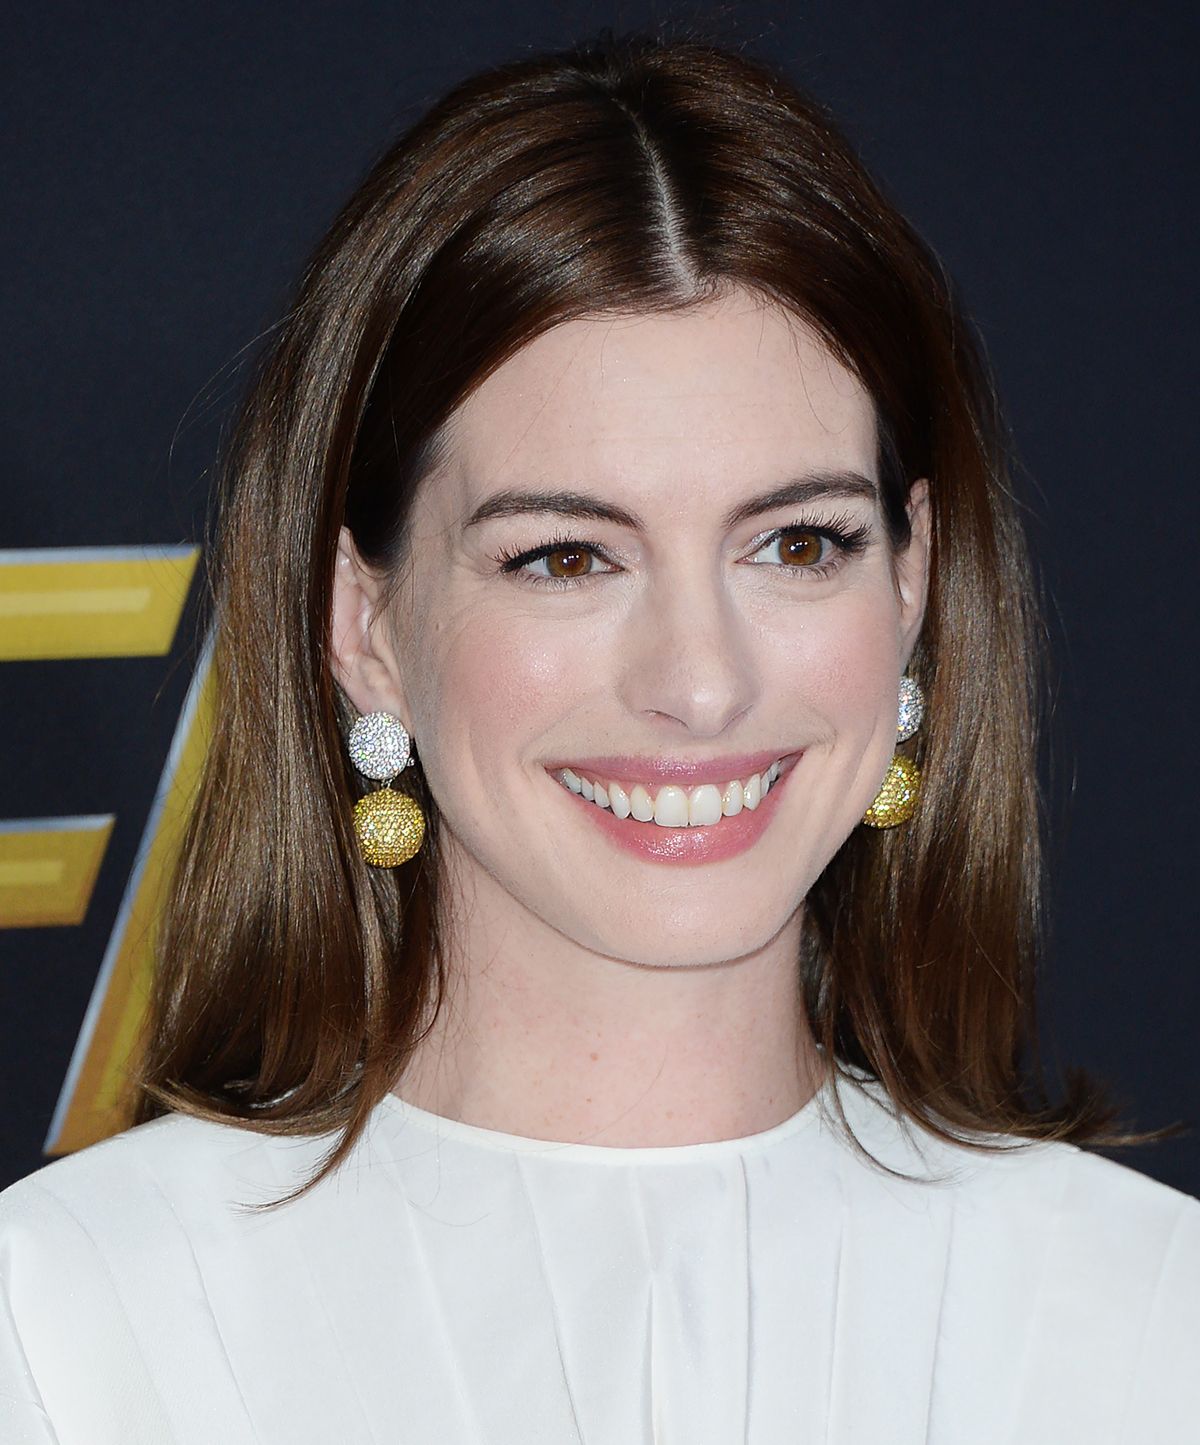 Hot pic: ANNE HATHAWAY